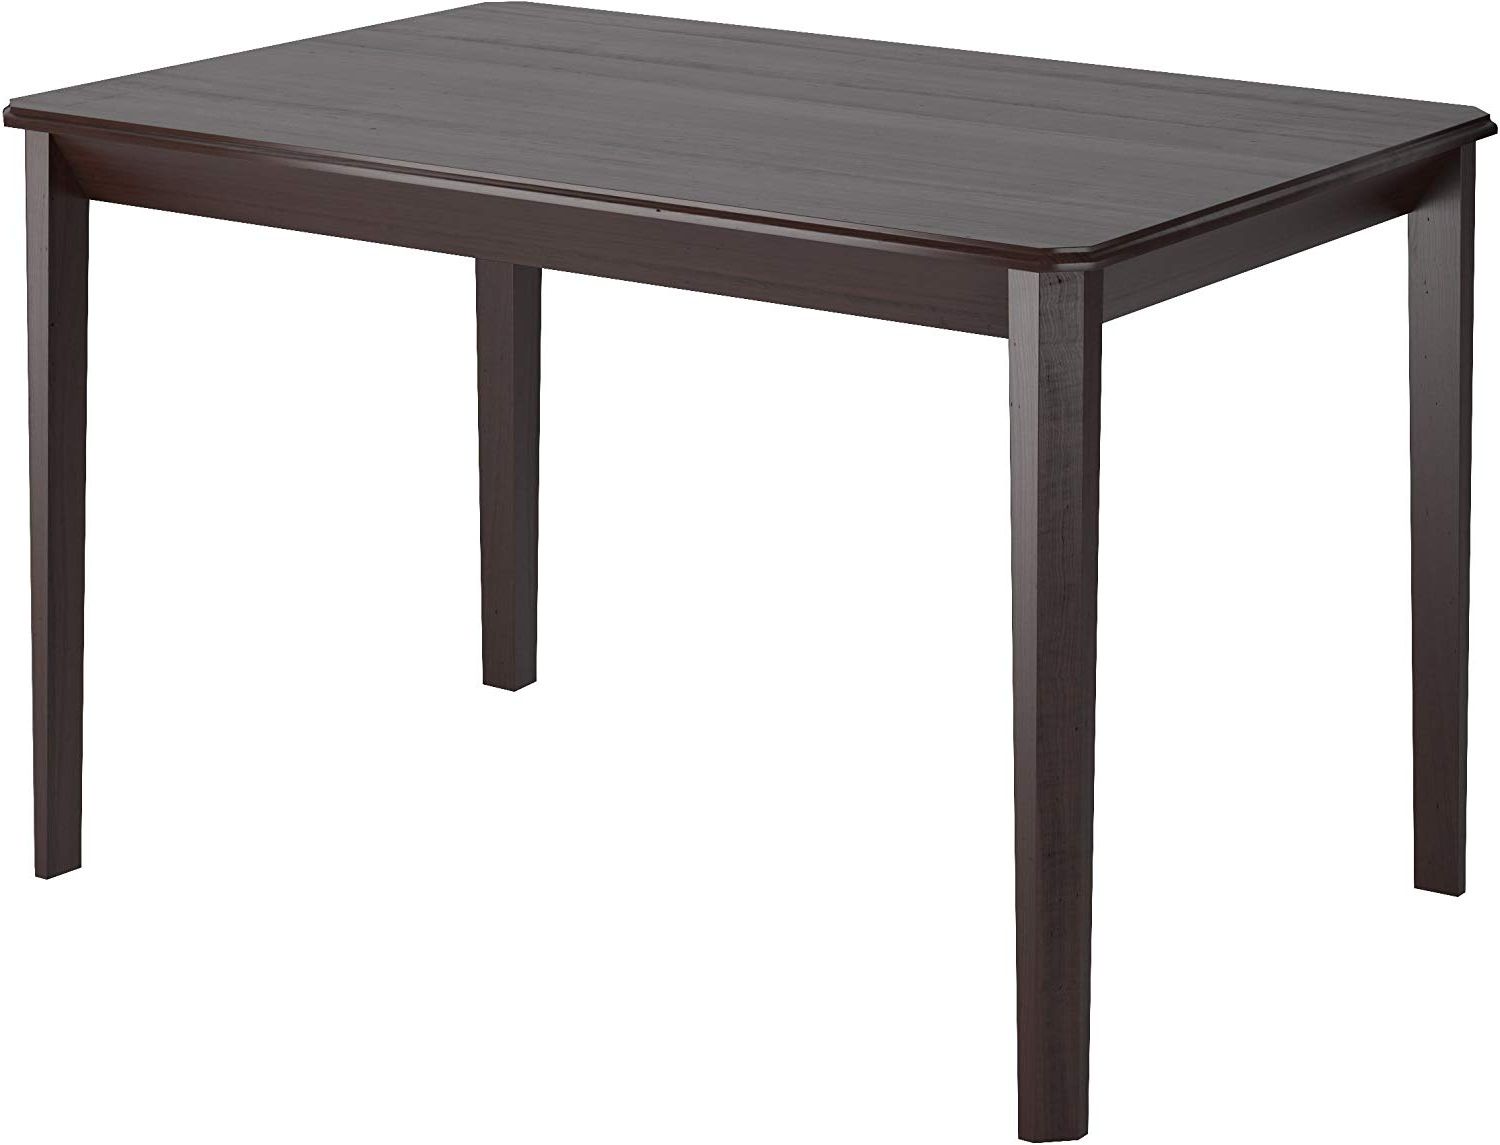 Amazon – Corliving Atwood Dining Table, 47", Cappuccino For Most Recently Released Atwood Transitional Rectangular Dining Tables (View 1 of 30)